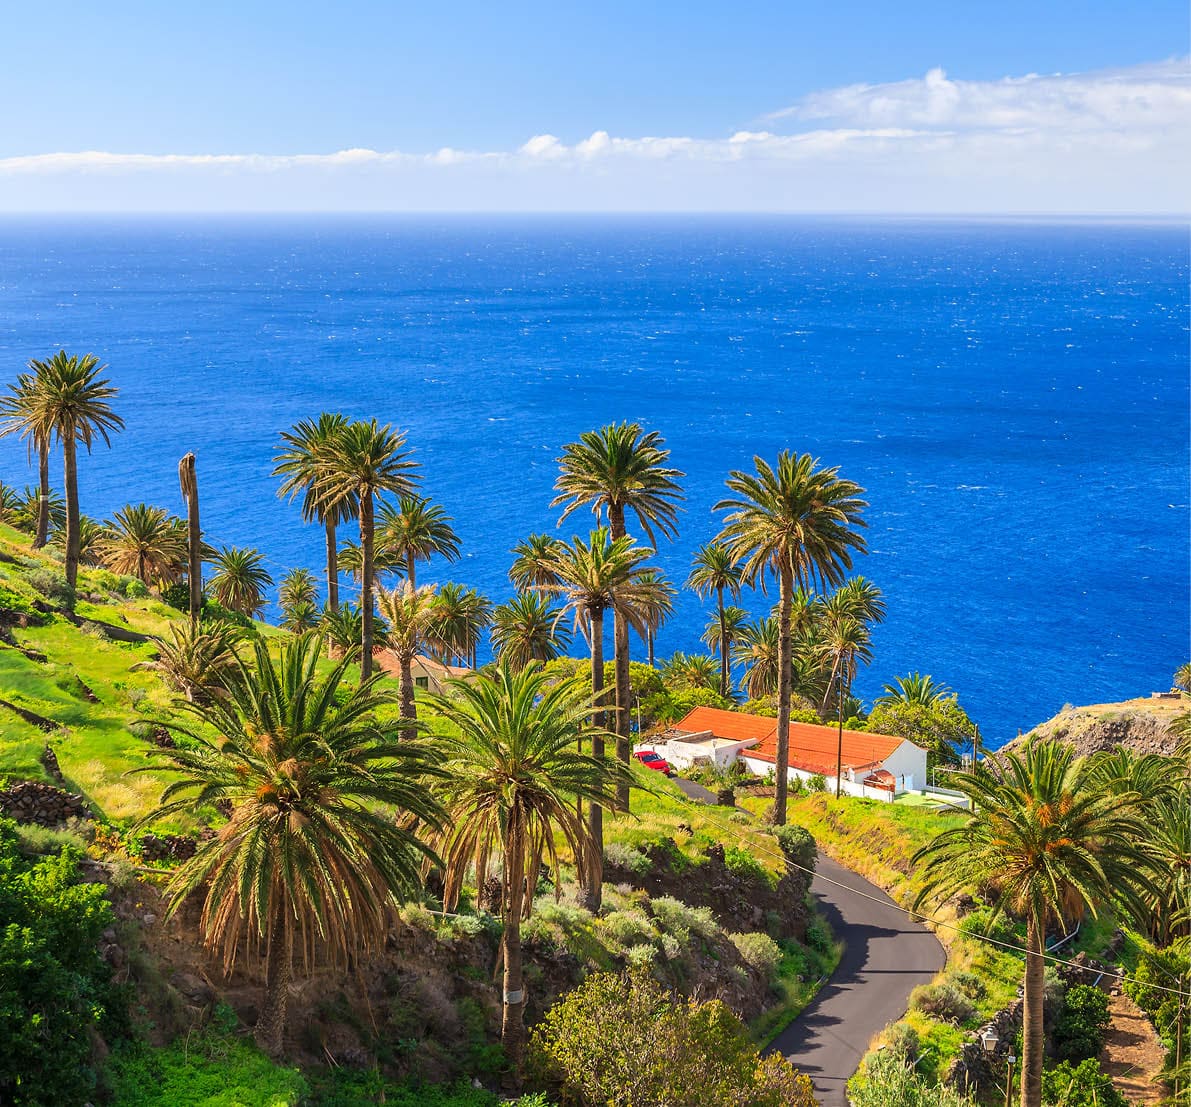 Palm trees with ocean water in background in tropical landscape of La Gomera island in Taguluche mountain village, Canary Islands, Spain